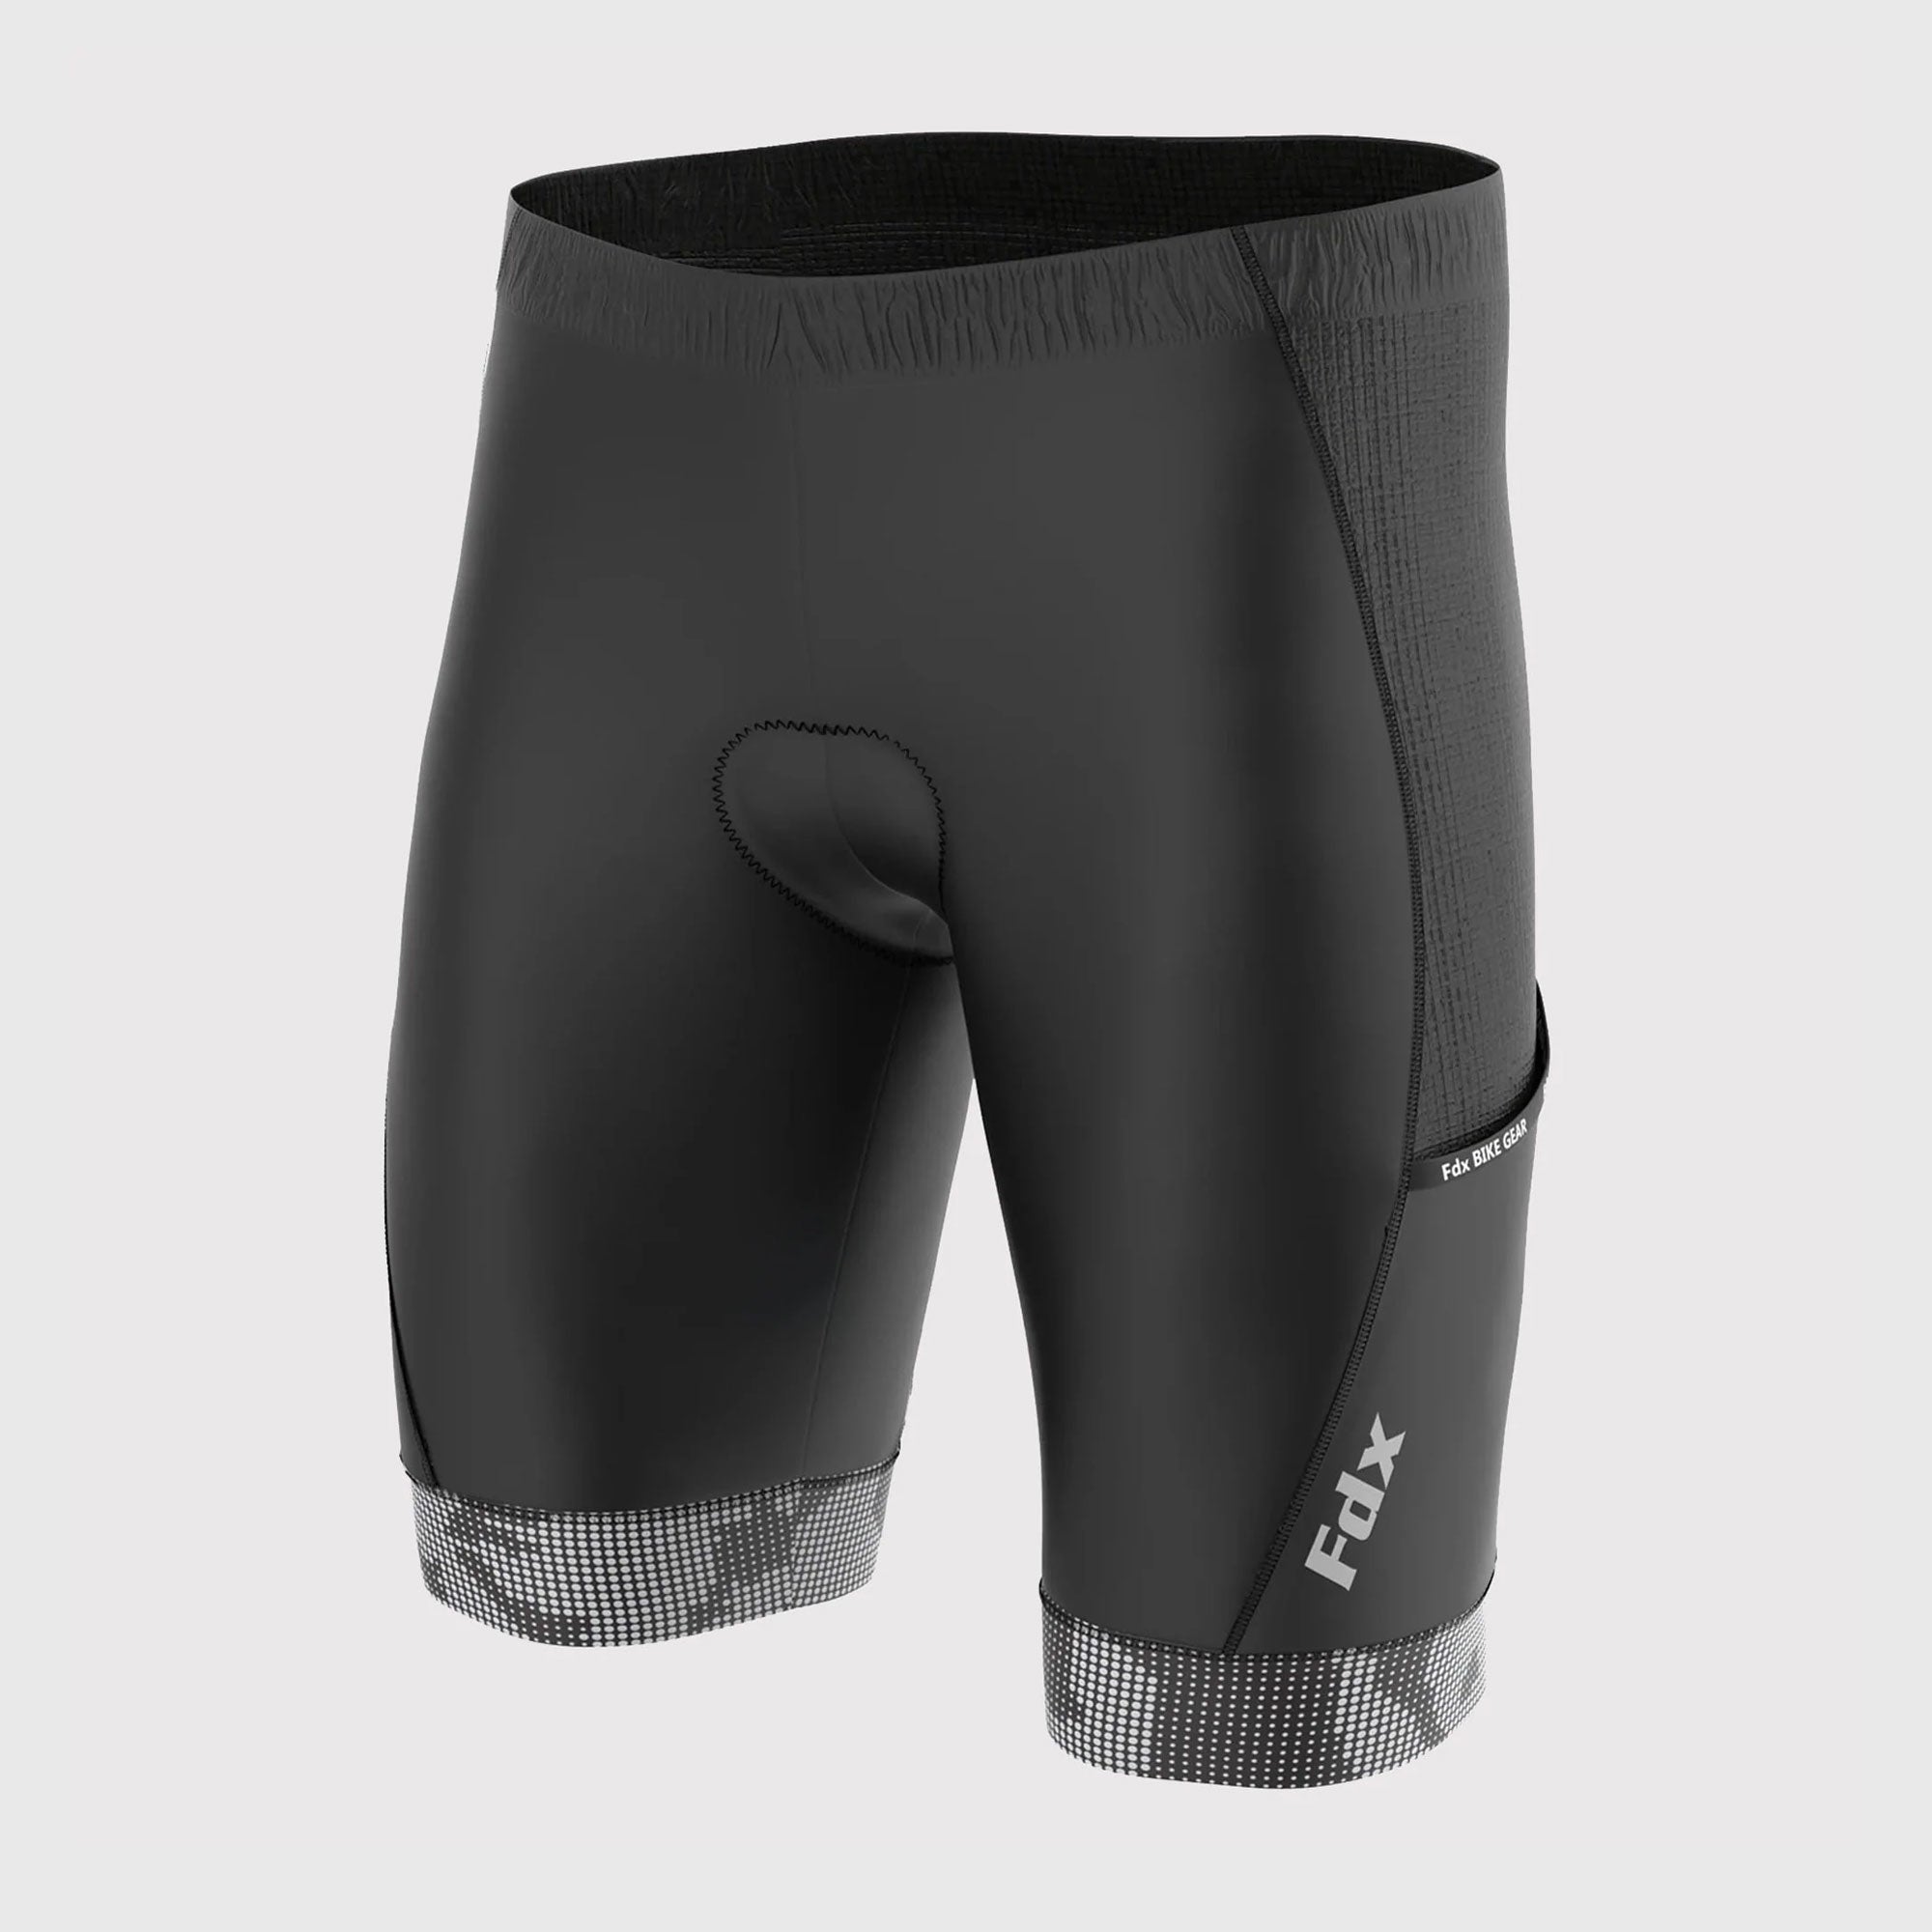 Home / Products / Fdx All Day Grey Men's Gel Padded Summer Cycling Shorts